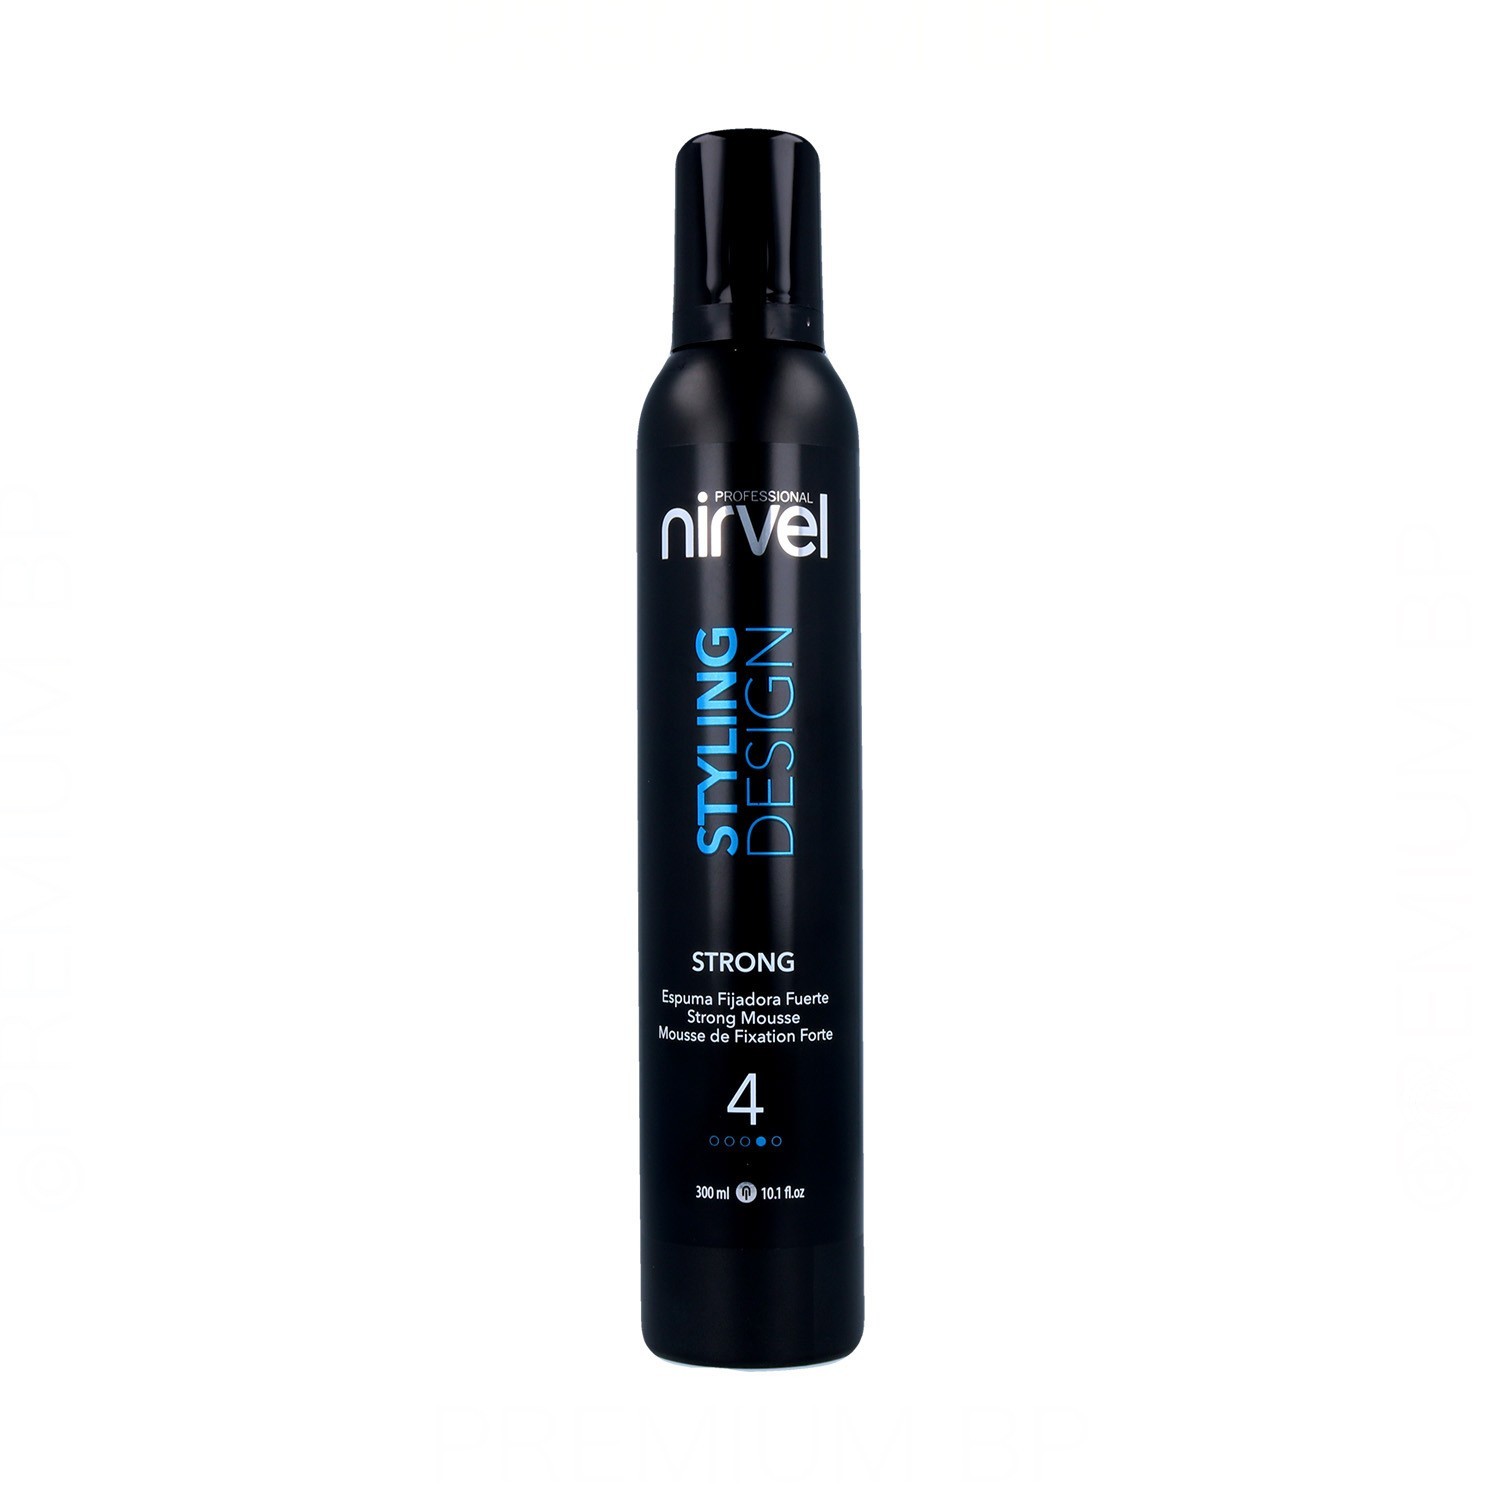 Nirvel Styling Mousse Forte (4) 300ml